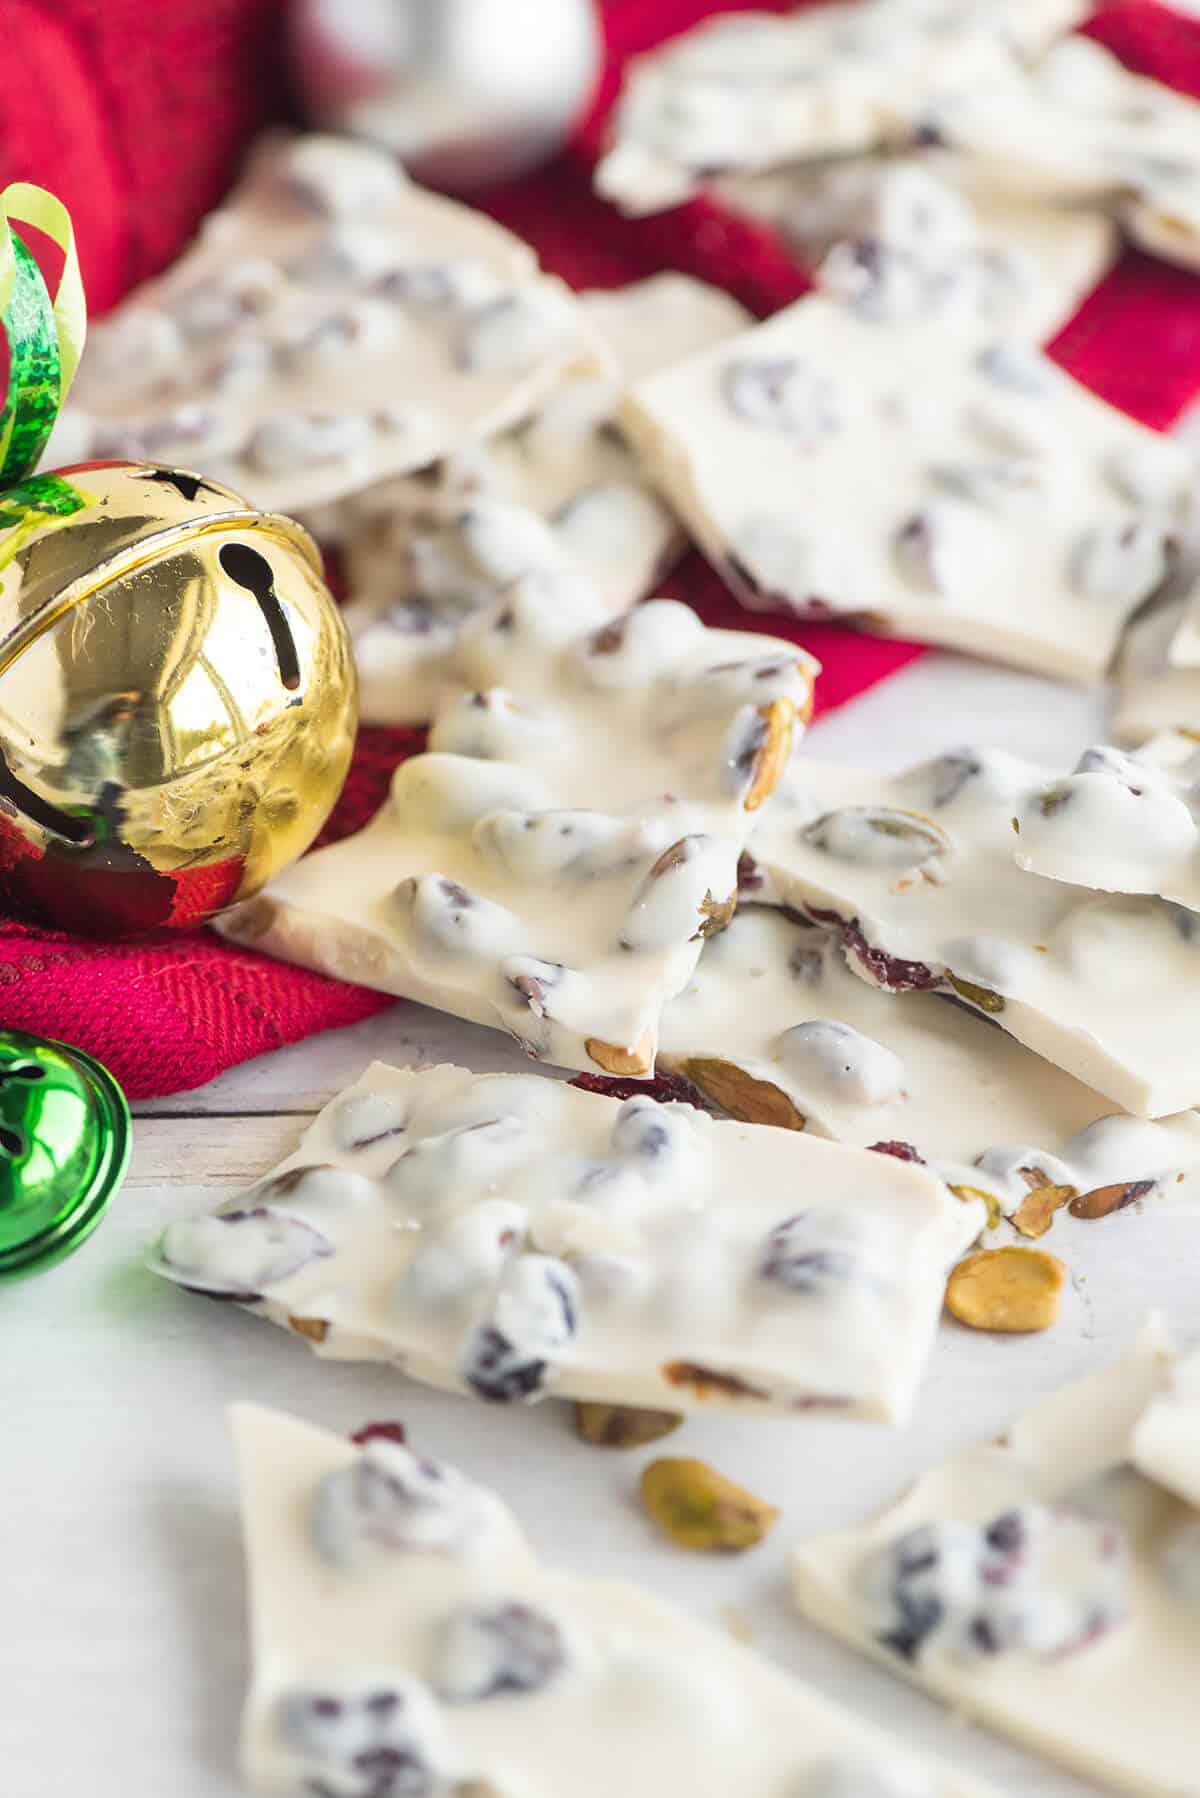 White chocolate bark pieces spread out with Christmas ornaments.